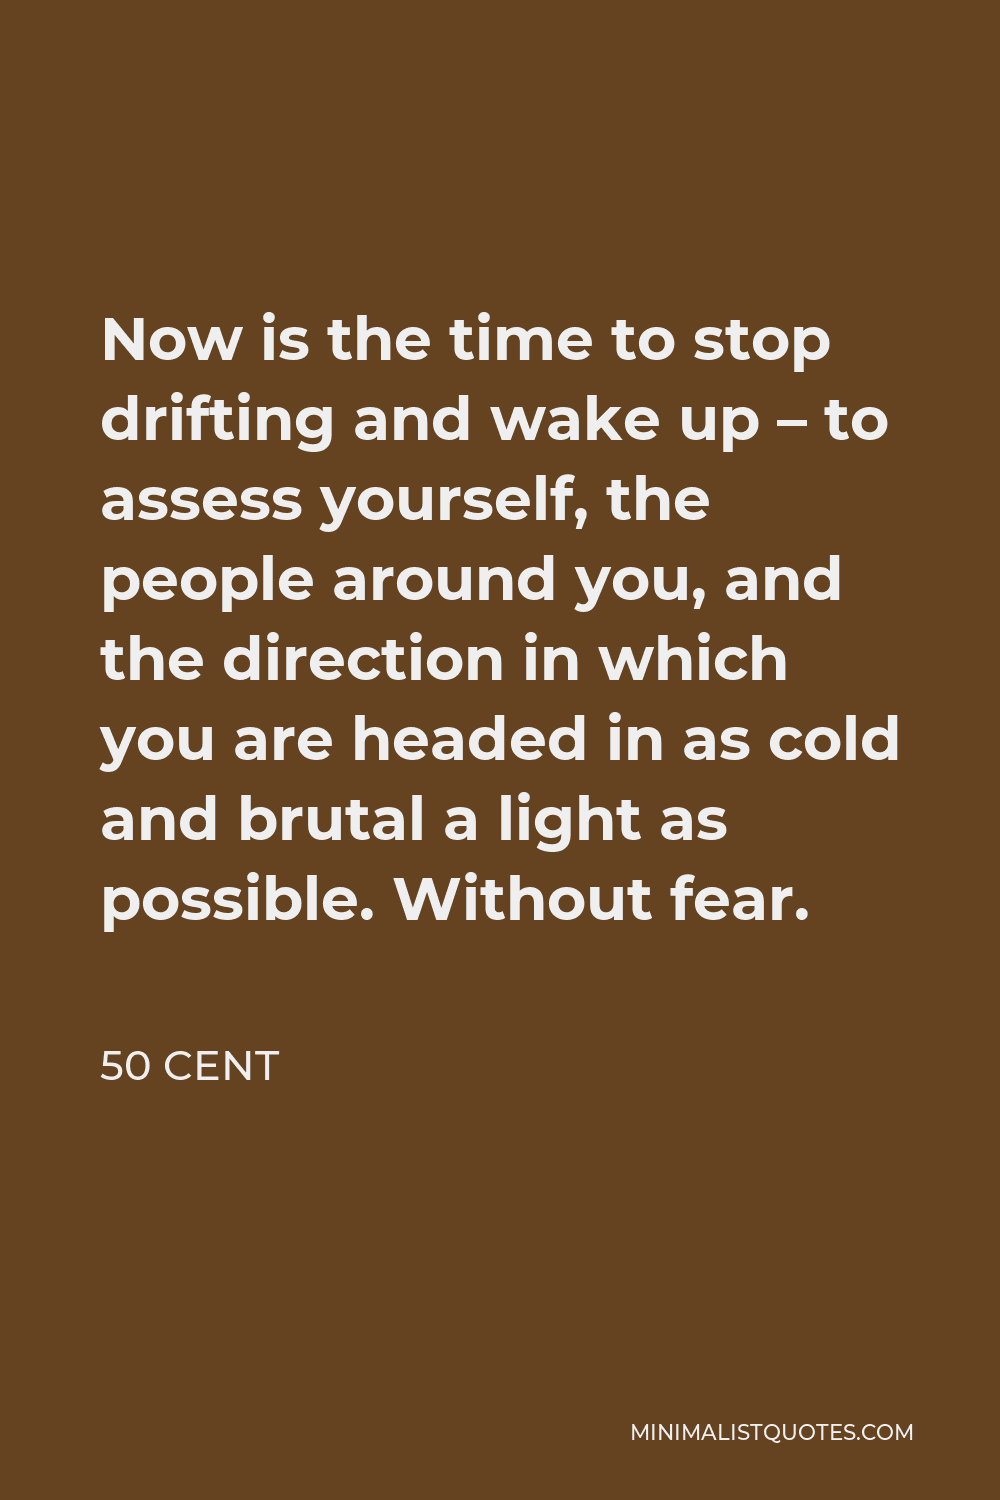 50 Cent Quote - Now is the time to stop drifting and wake up – to assess yourself, the people around you, and the direction in which you are headed in as cold and brutal a light as possible. Without fear.